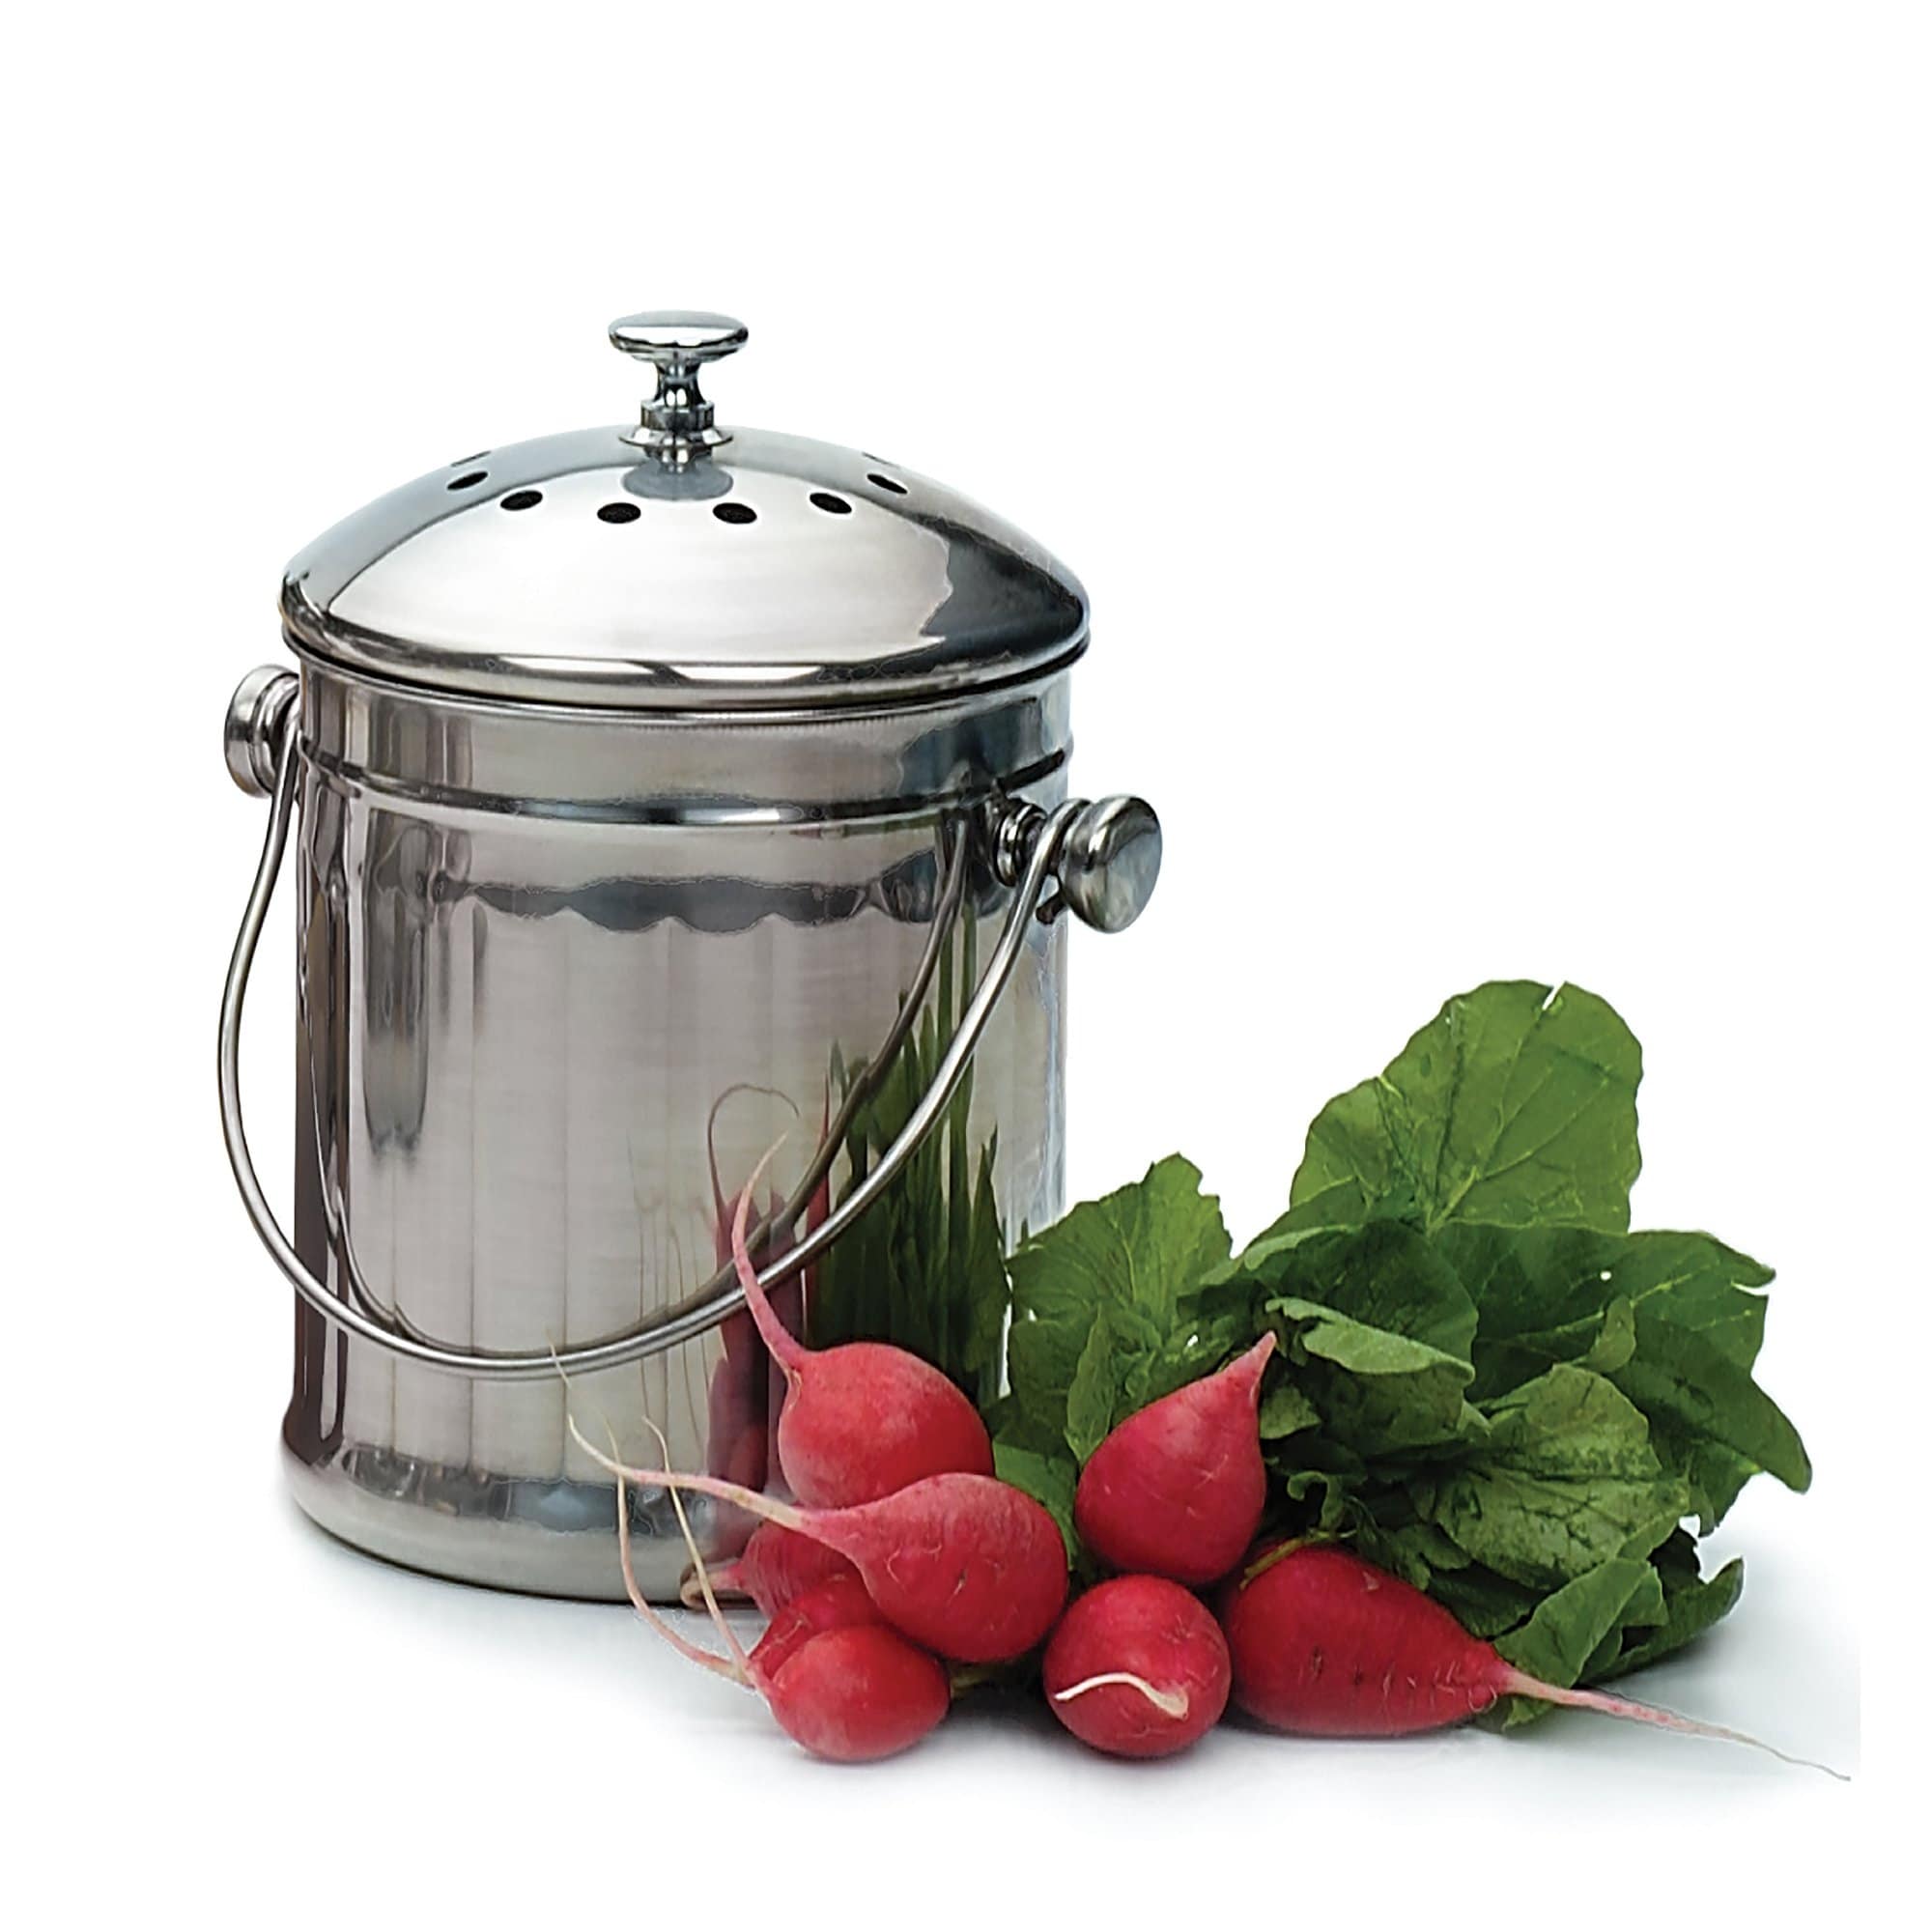 https://ak1.ostkcdn.com/images/products/is/images/direct/d183f5cfd13c19464d7734c5a836ba5292619180/Stainless-steel-compost-bucket.jpg